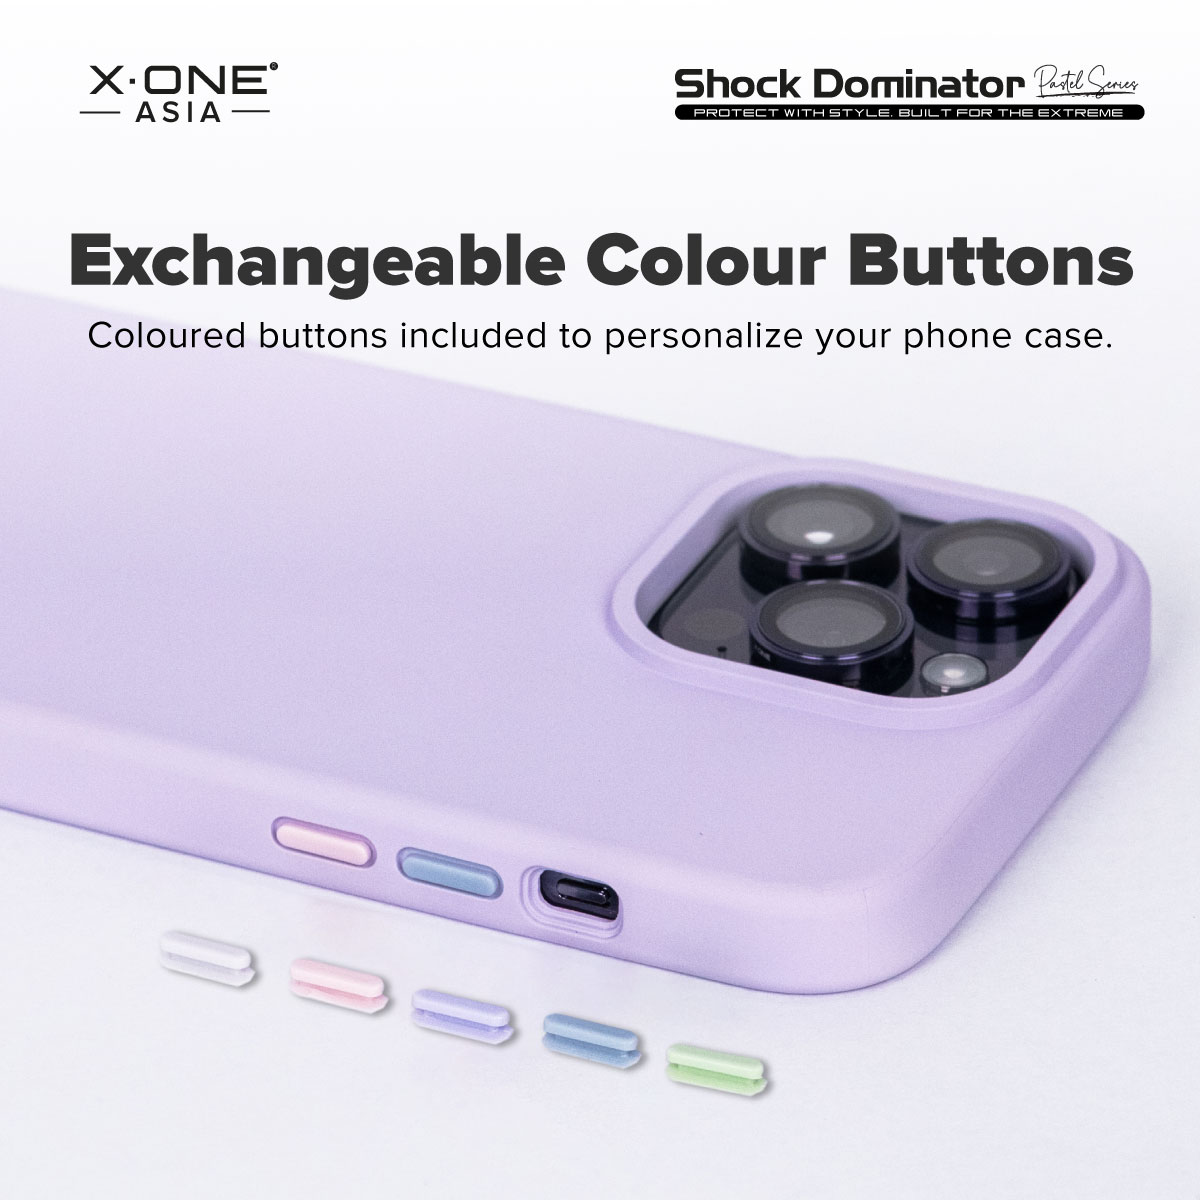 Exchangeable-Colour-Buttons